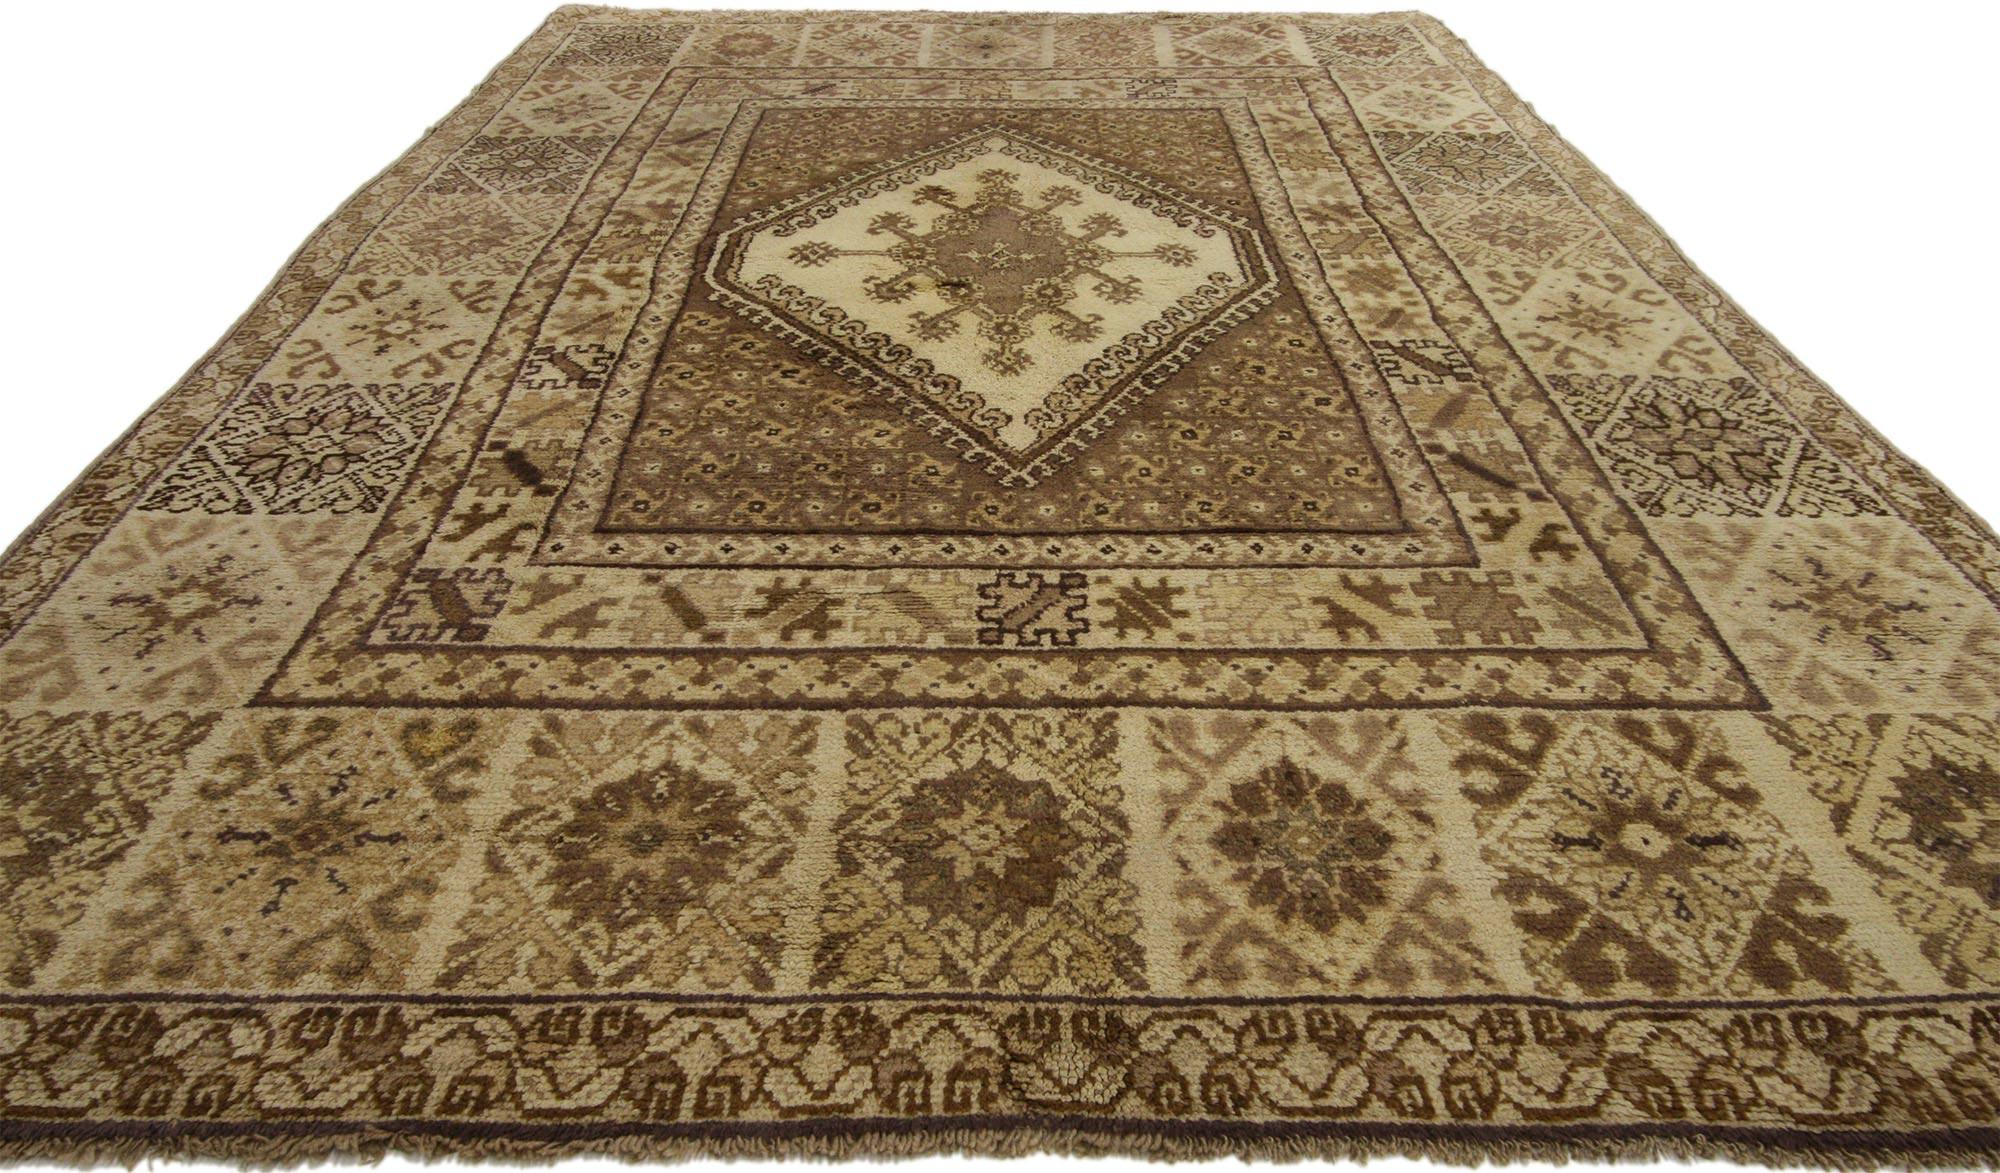 Organic Modern Vintage Berber Rabat Moroccan Rug with Neutral Earth-Tone Colors For Sale